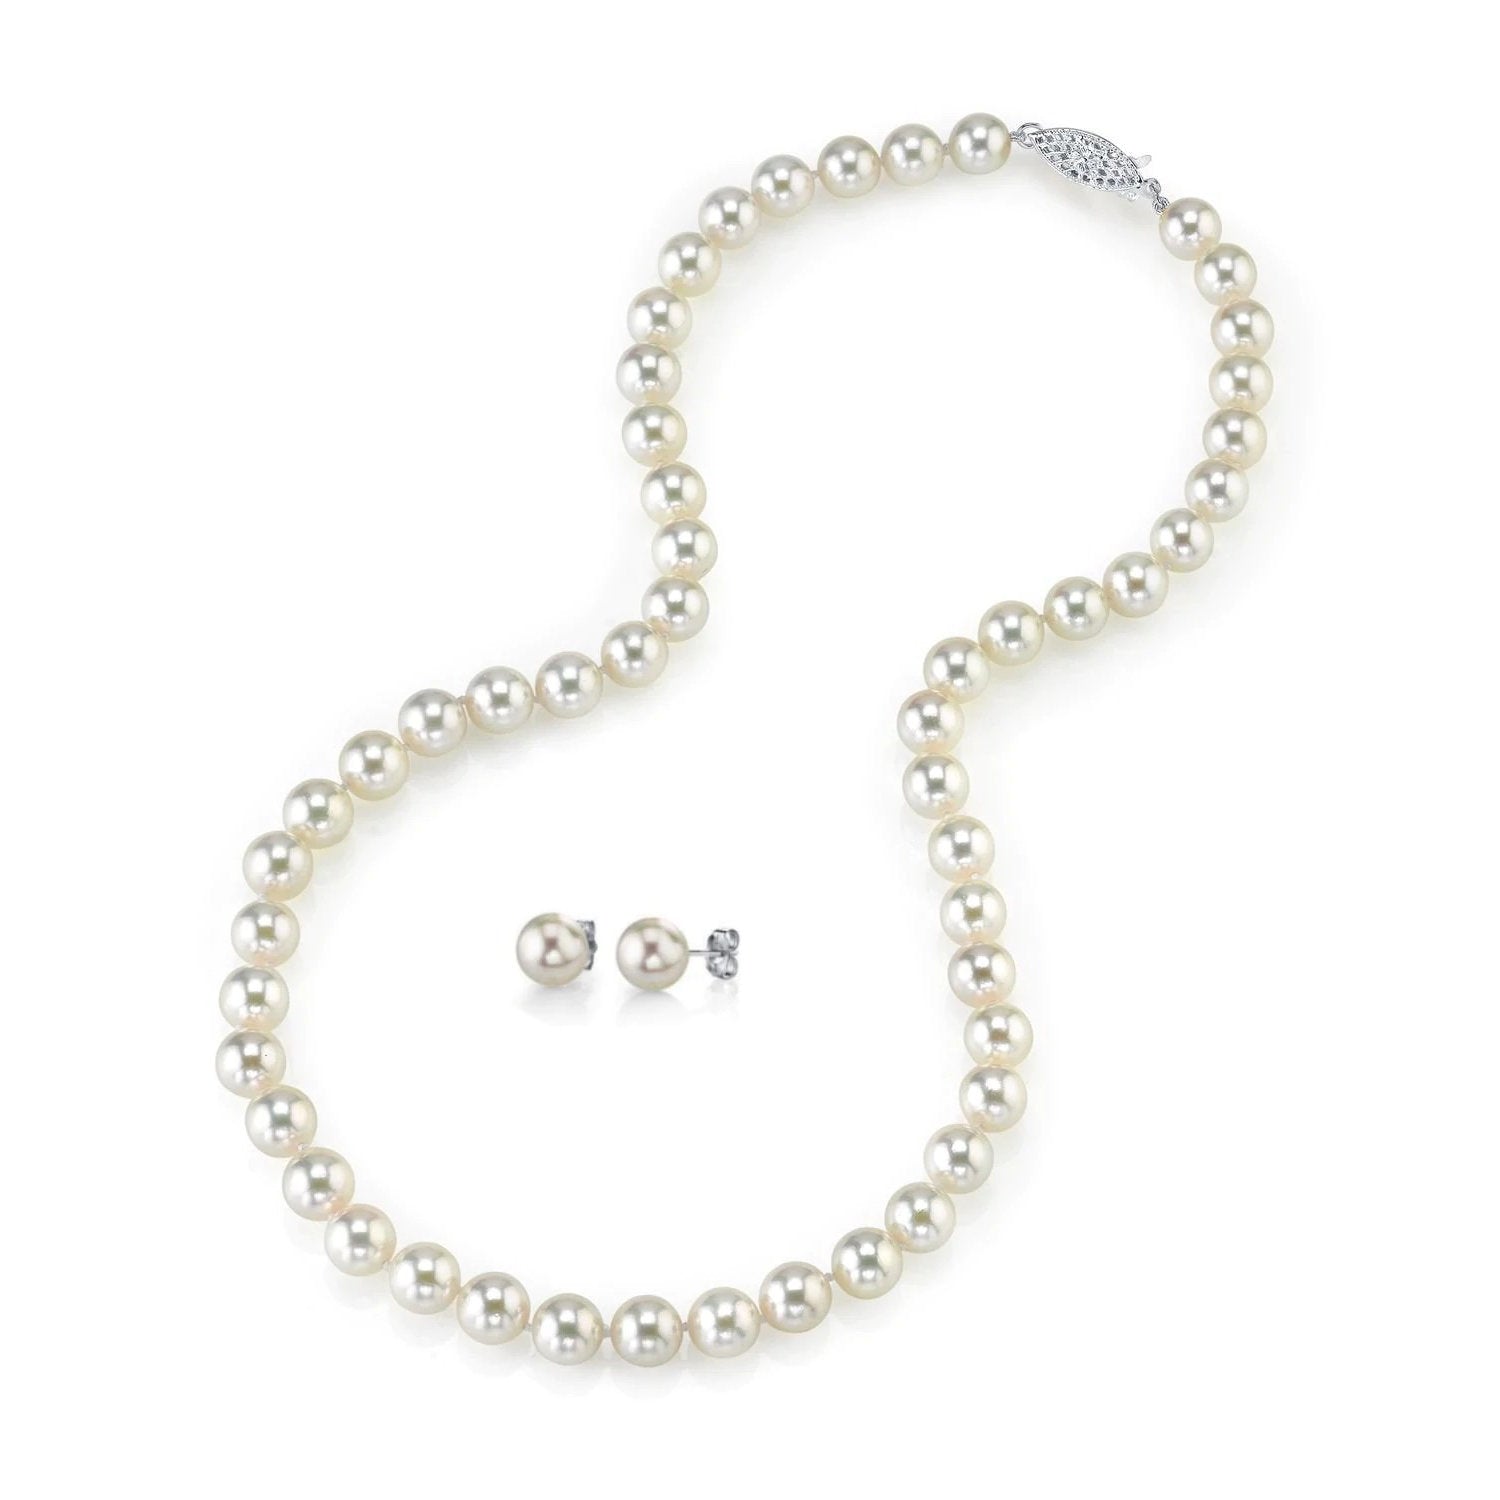 Haloed Faux Pearl Necklace and Earring Set